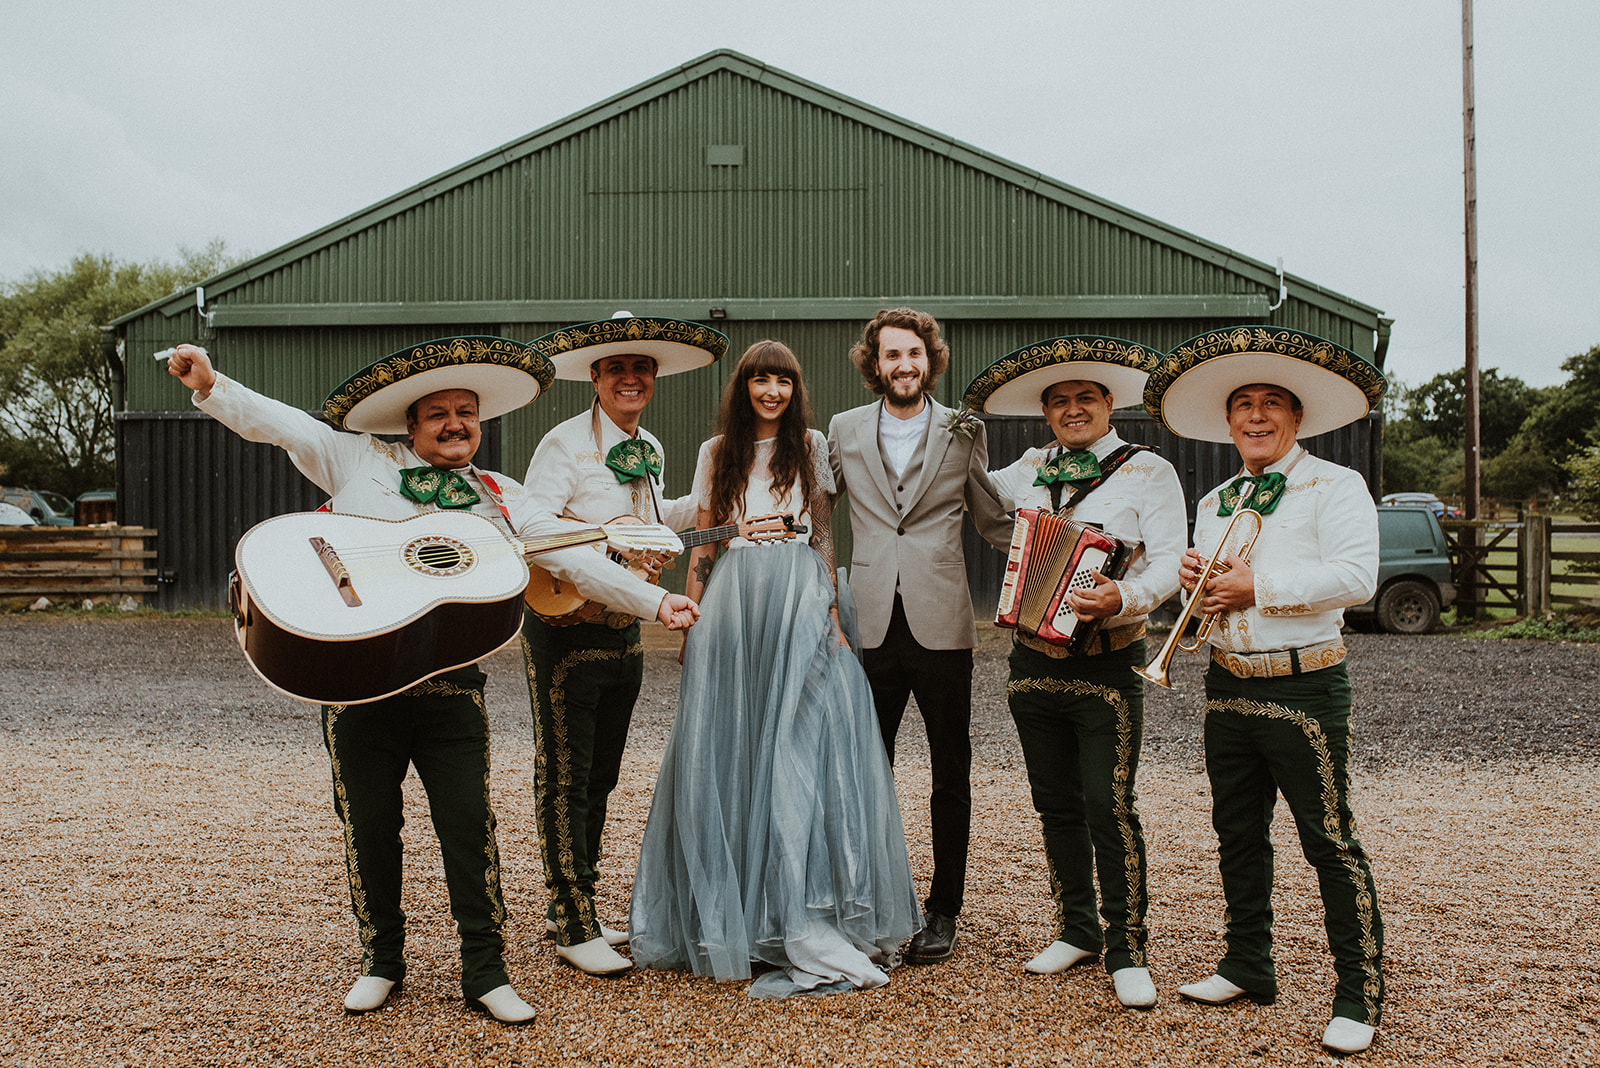 A mariachi band congratulated the couple after the ceremony